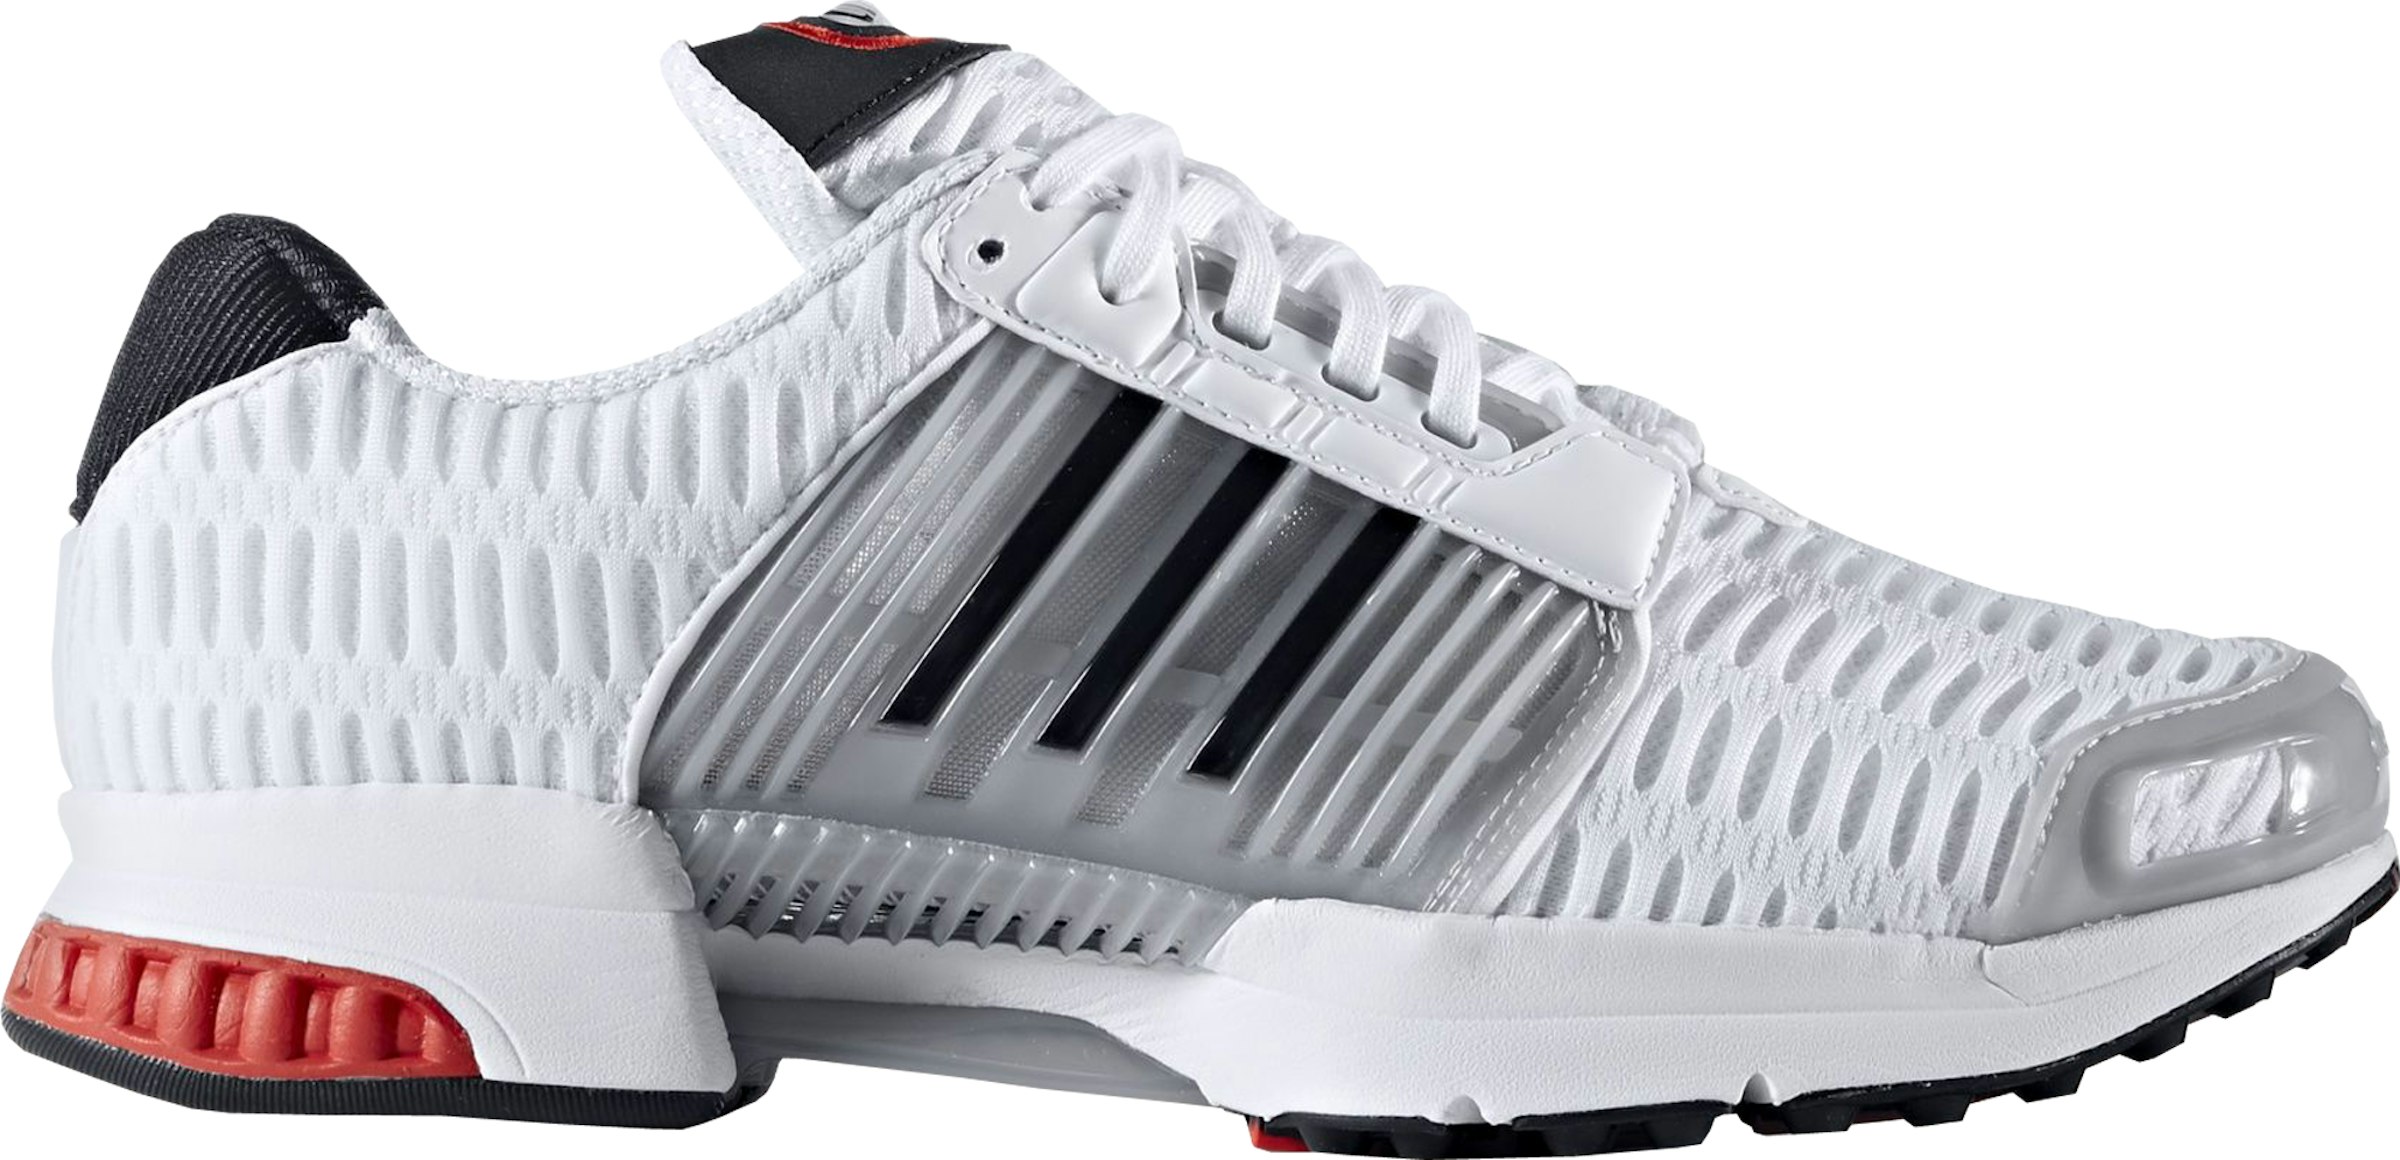 adidas Climacool OG White Red メンズ BY3008 -